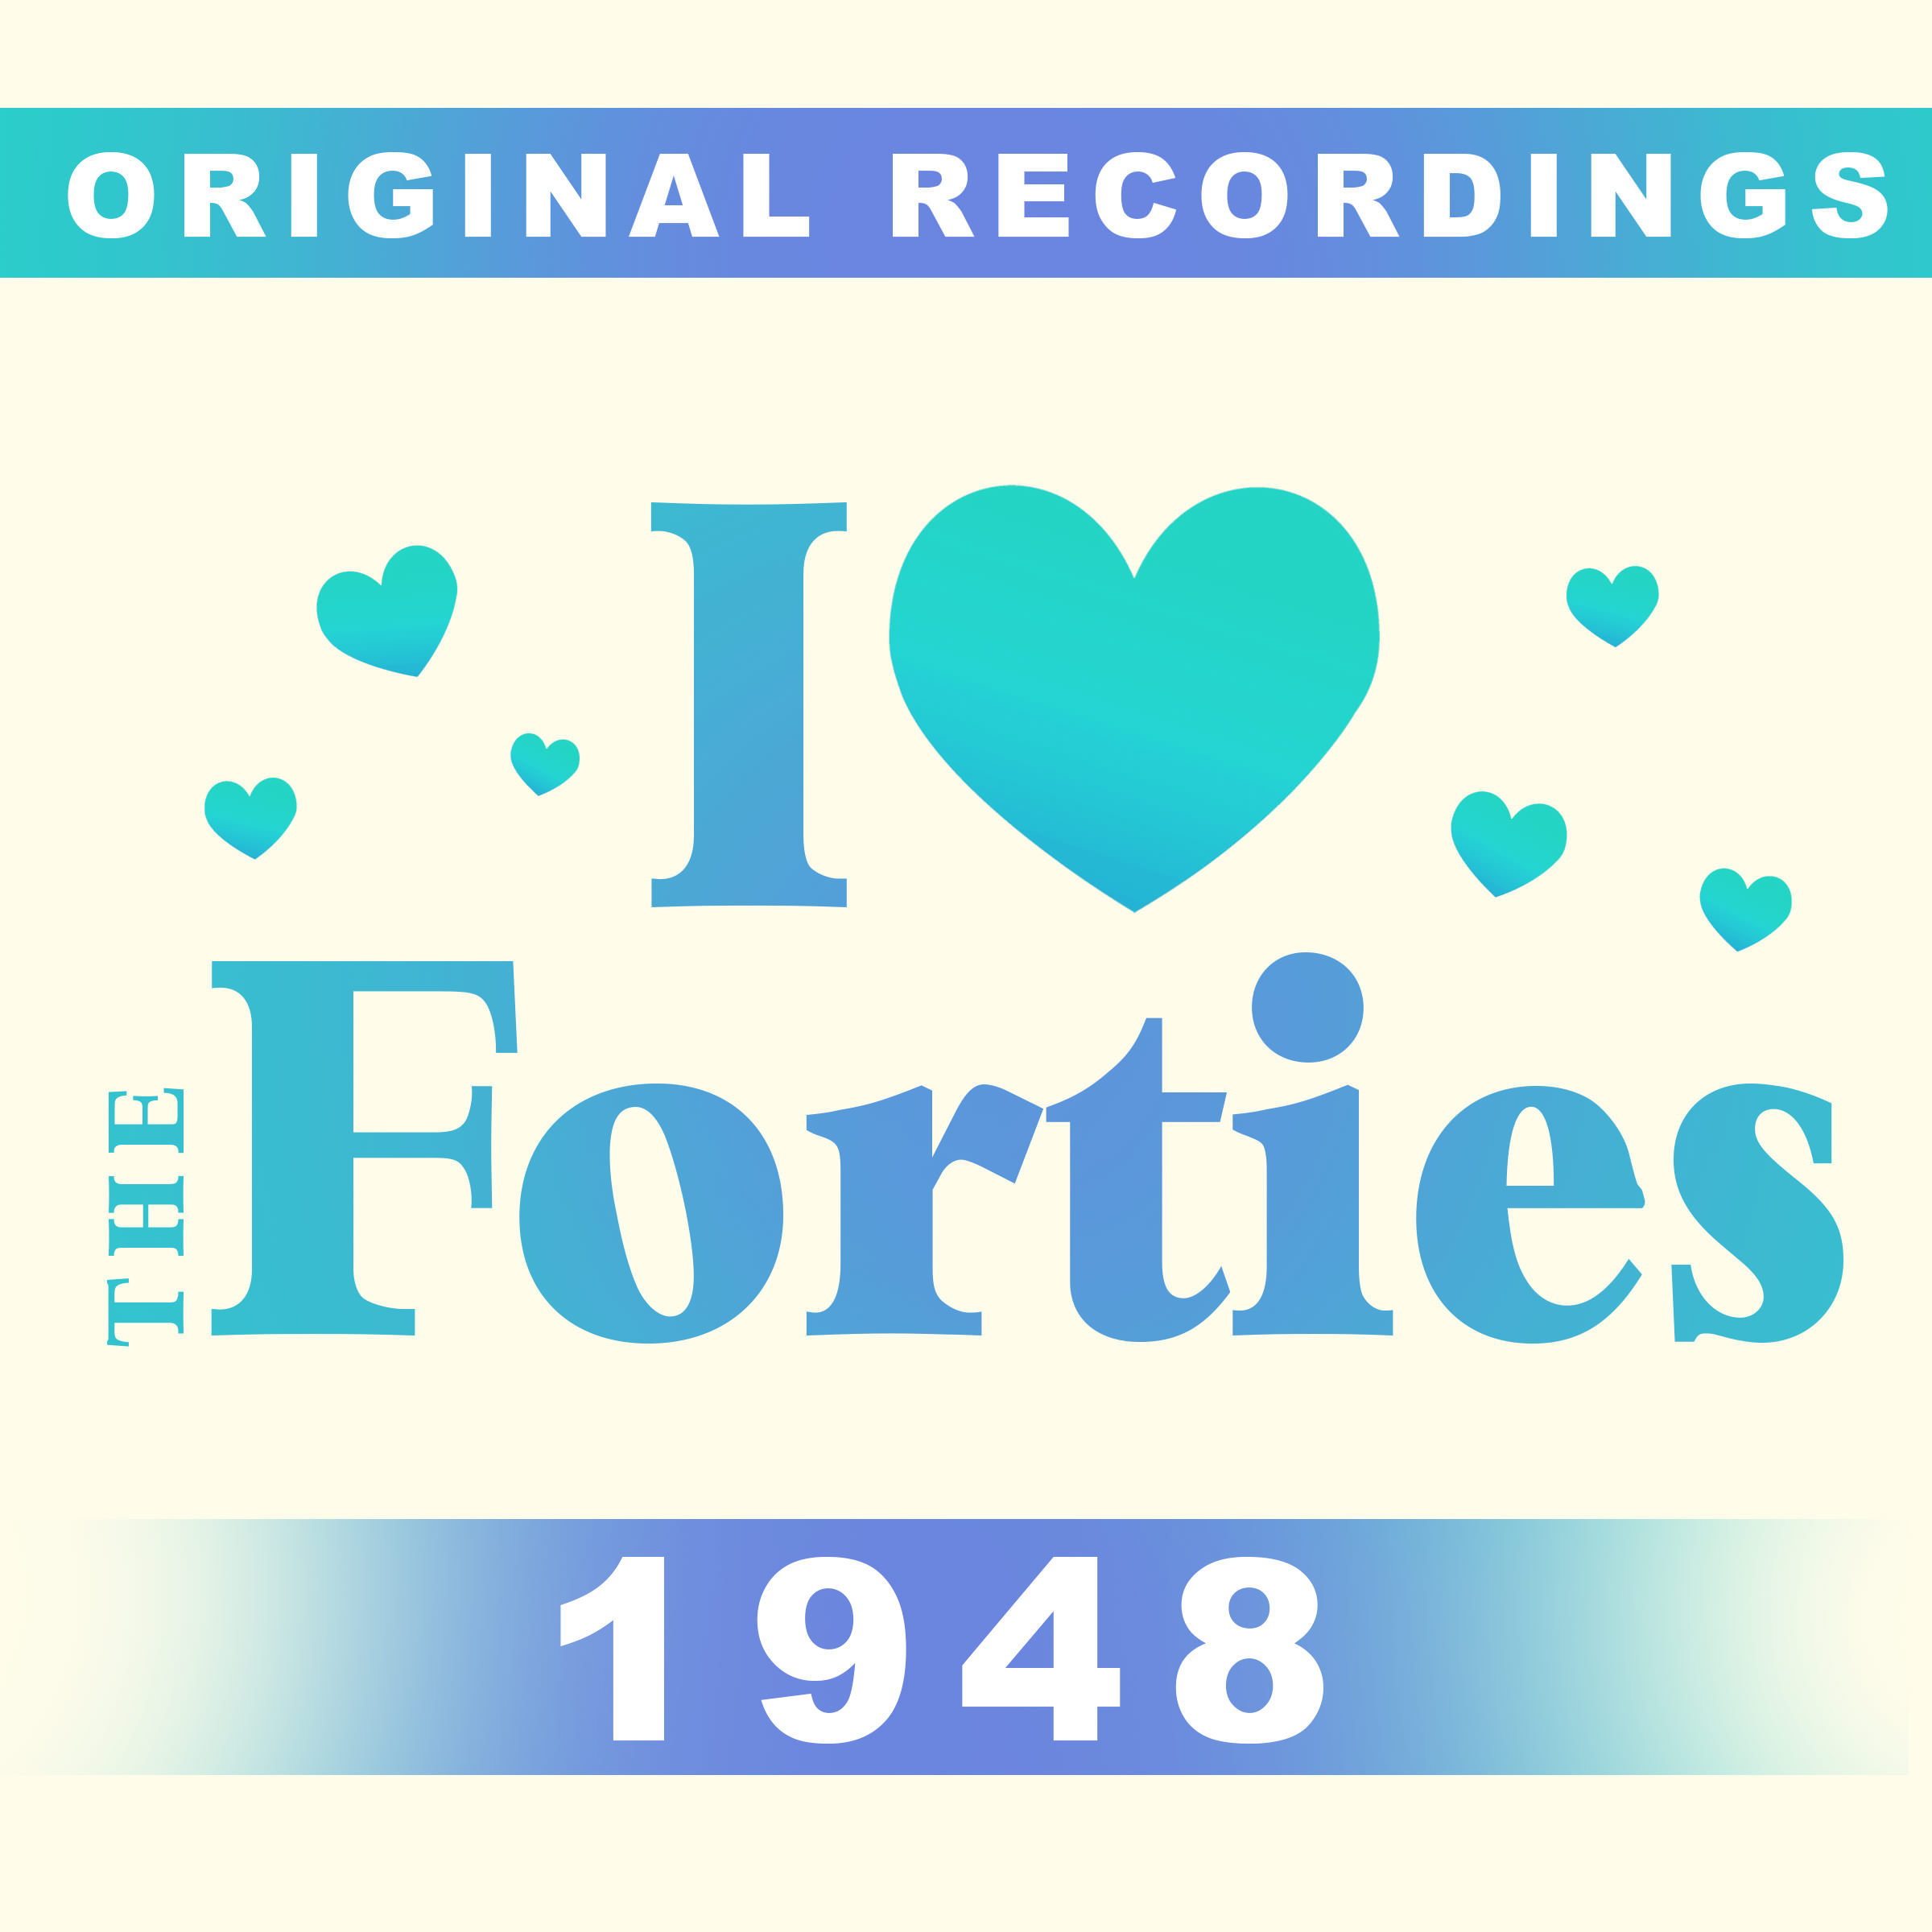 I Love The Forties: 1948